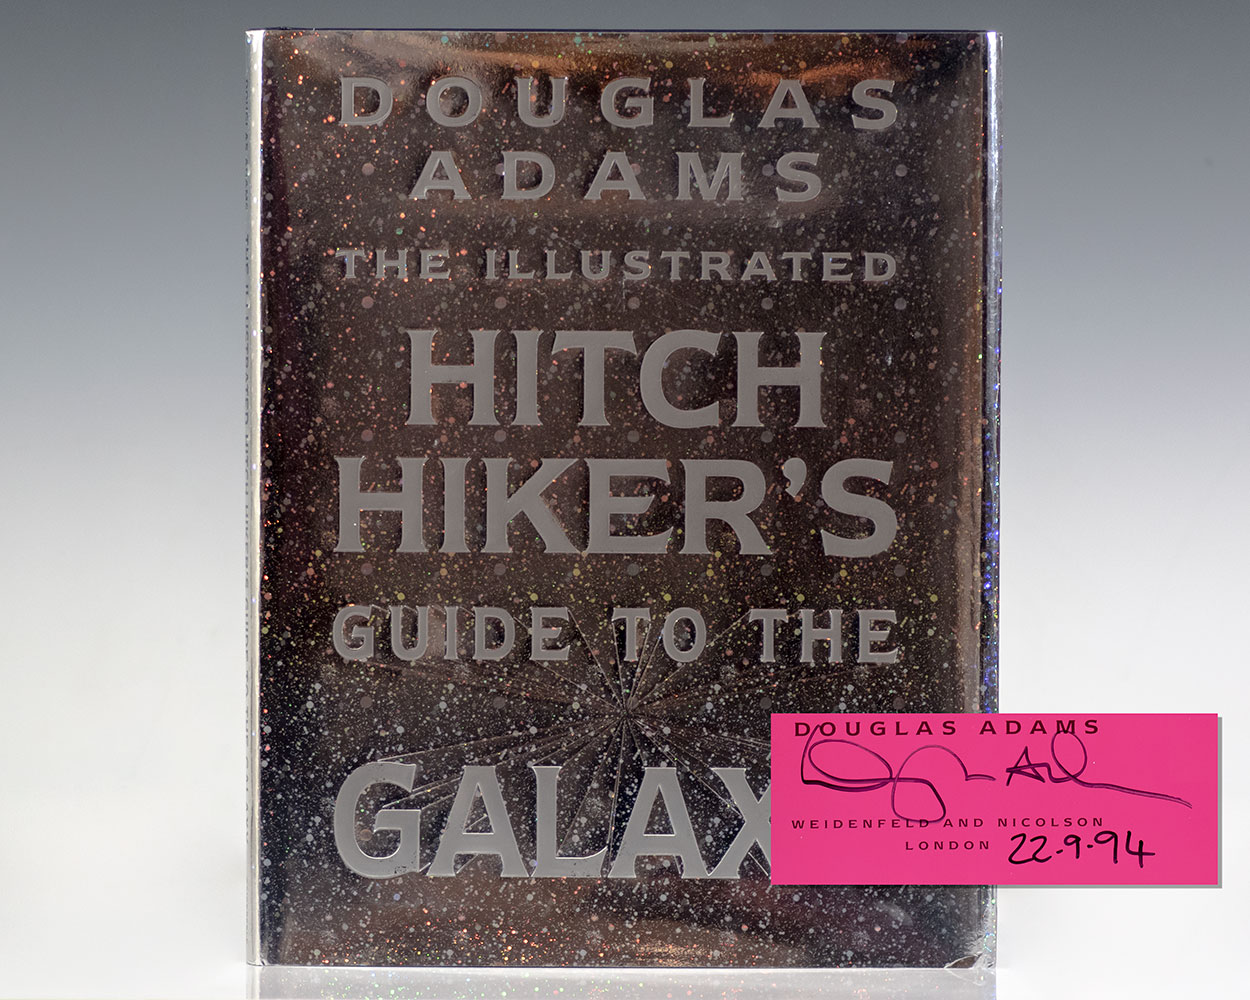 XVR27's Updates - Hitchhiker's Guide To The Galaxy